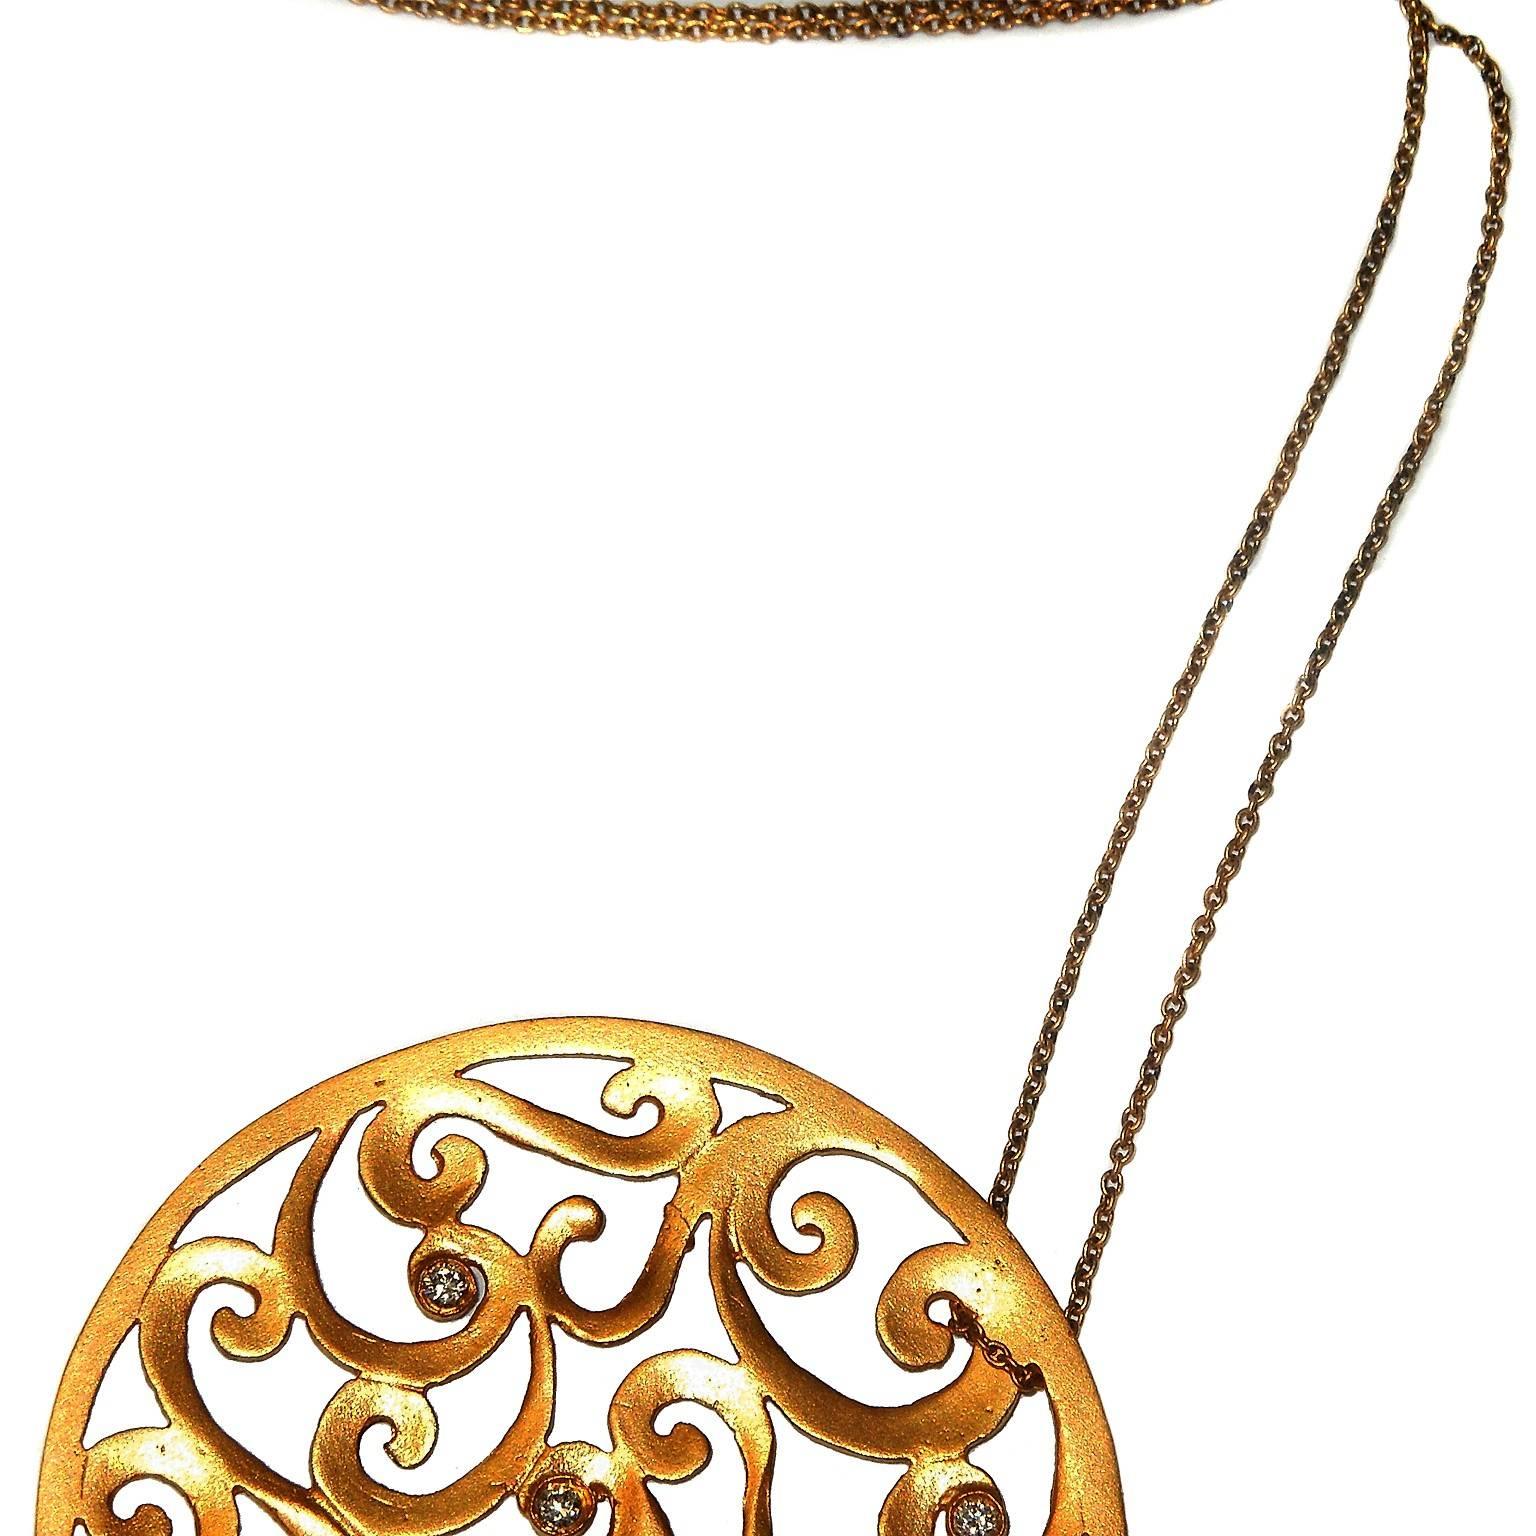 14K Yellow Gold Pendant with Diamonds and Chain

0.16ct. H Color, VS Clarity Diamonds

6.6 grams 14k gold

Pendant is 1.6 L x 1.6 W round

Chain is 16 inches in length total but has a loop at 15 inches for a shorter option.

Made in Turkey

Estate